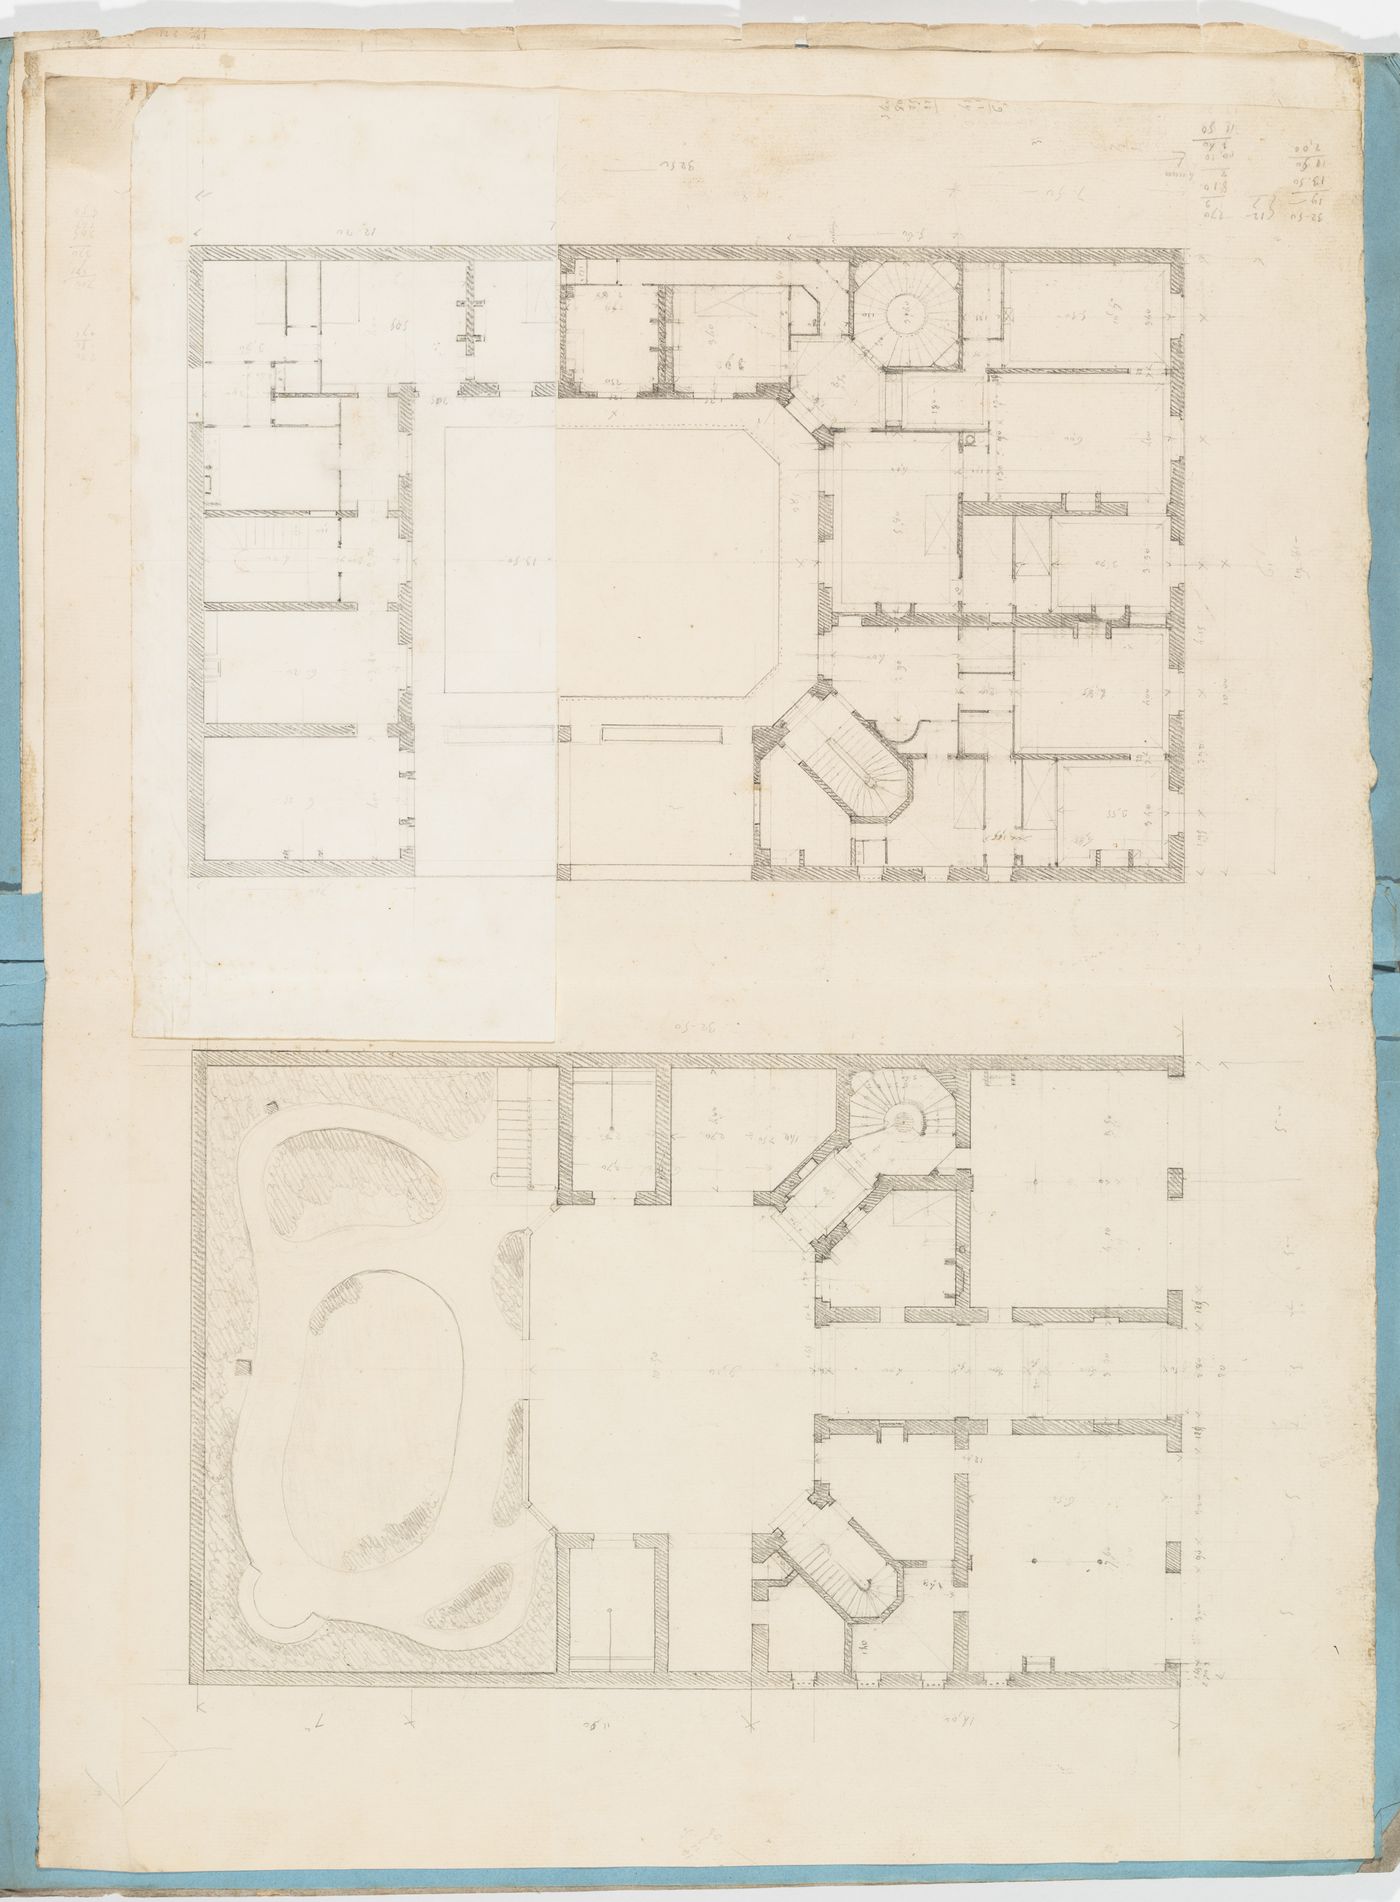 Project for a hôtel for M. Busche: Ground and first [?] floor plans for a four-storey hôtel, with an alternate design for the first [?] floor